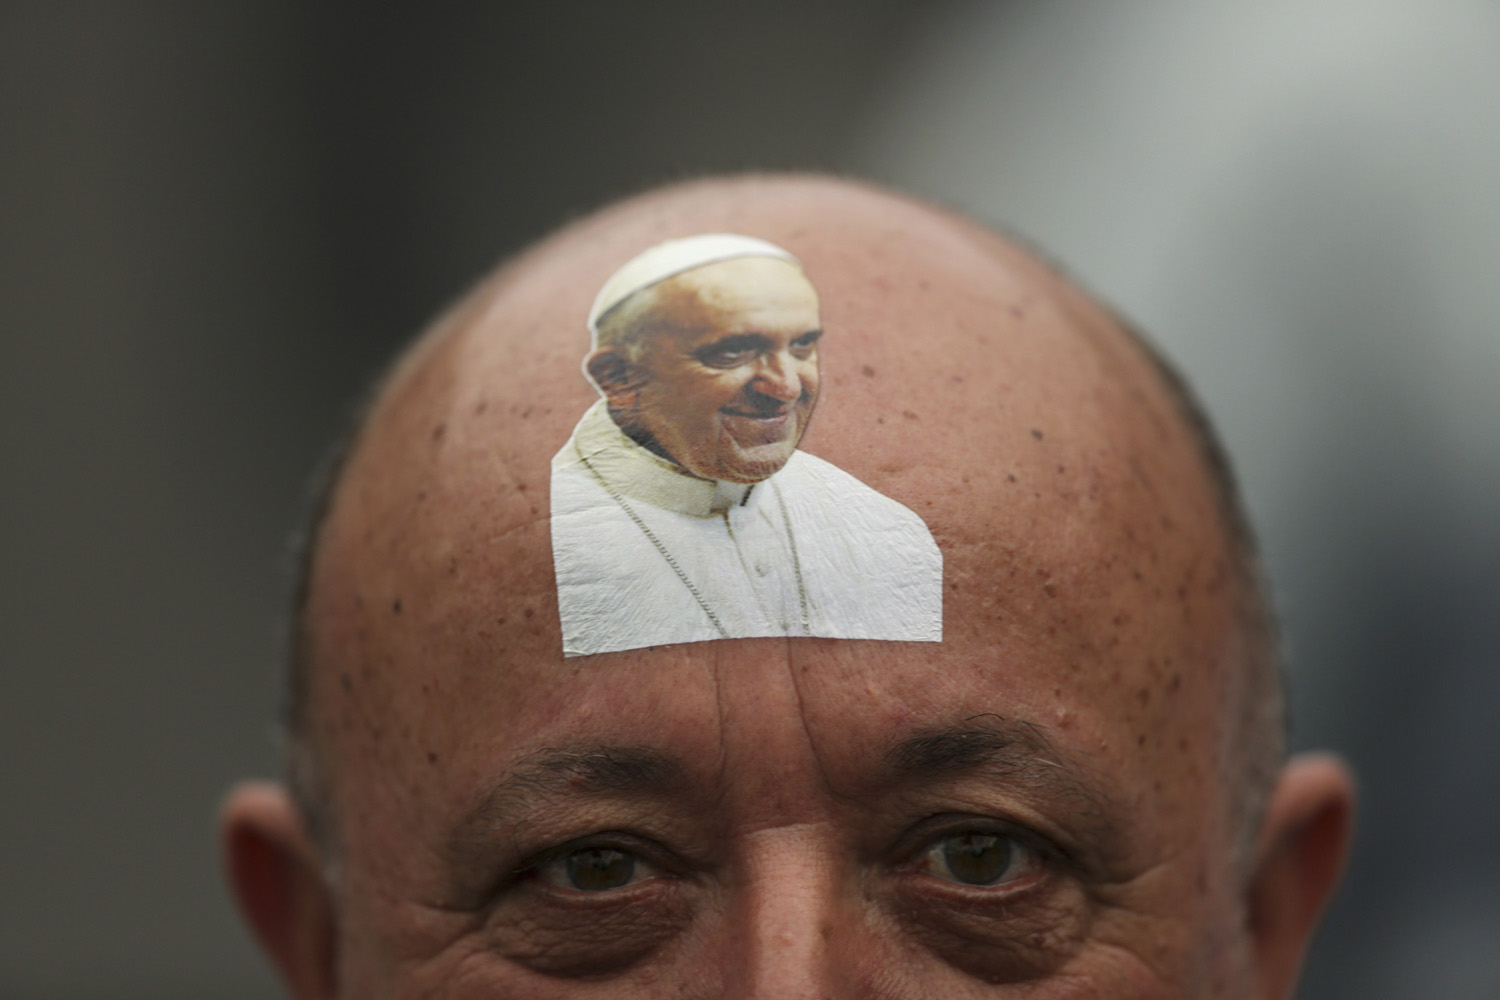 Catholic faithful with sticker bearing an image of Pope Francis on his forehead looks on while waiting for the Pope to arrive in Copacabana beach in Rio de Janeiro